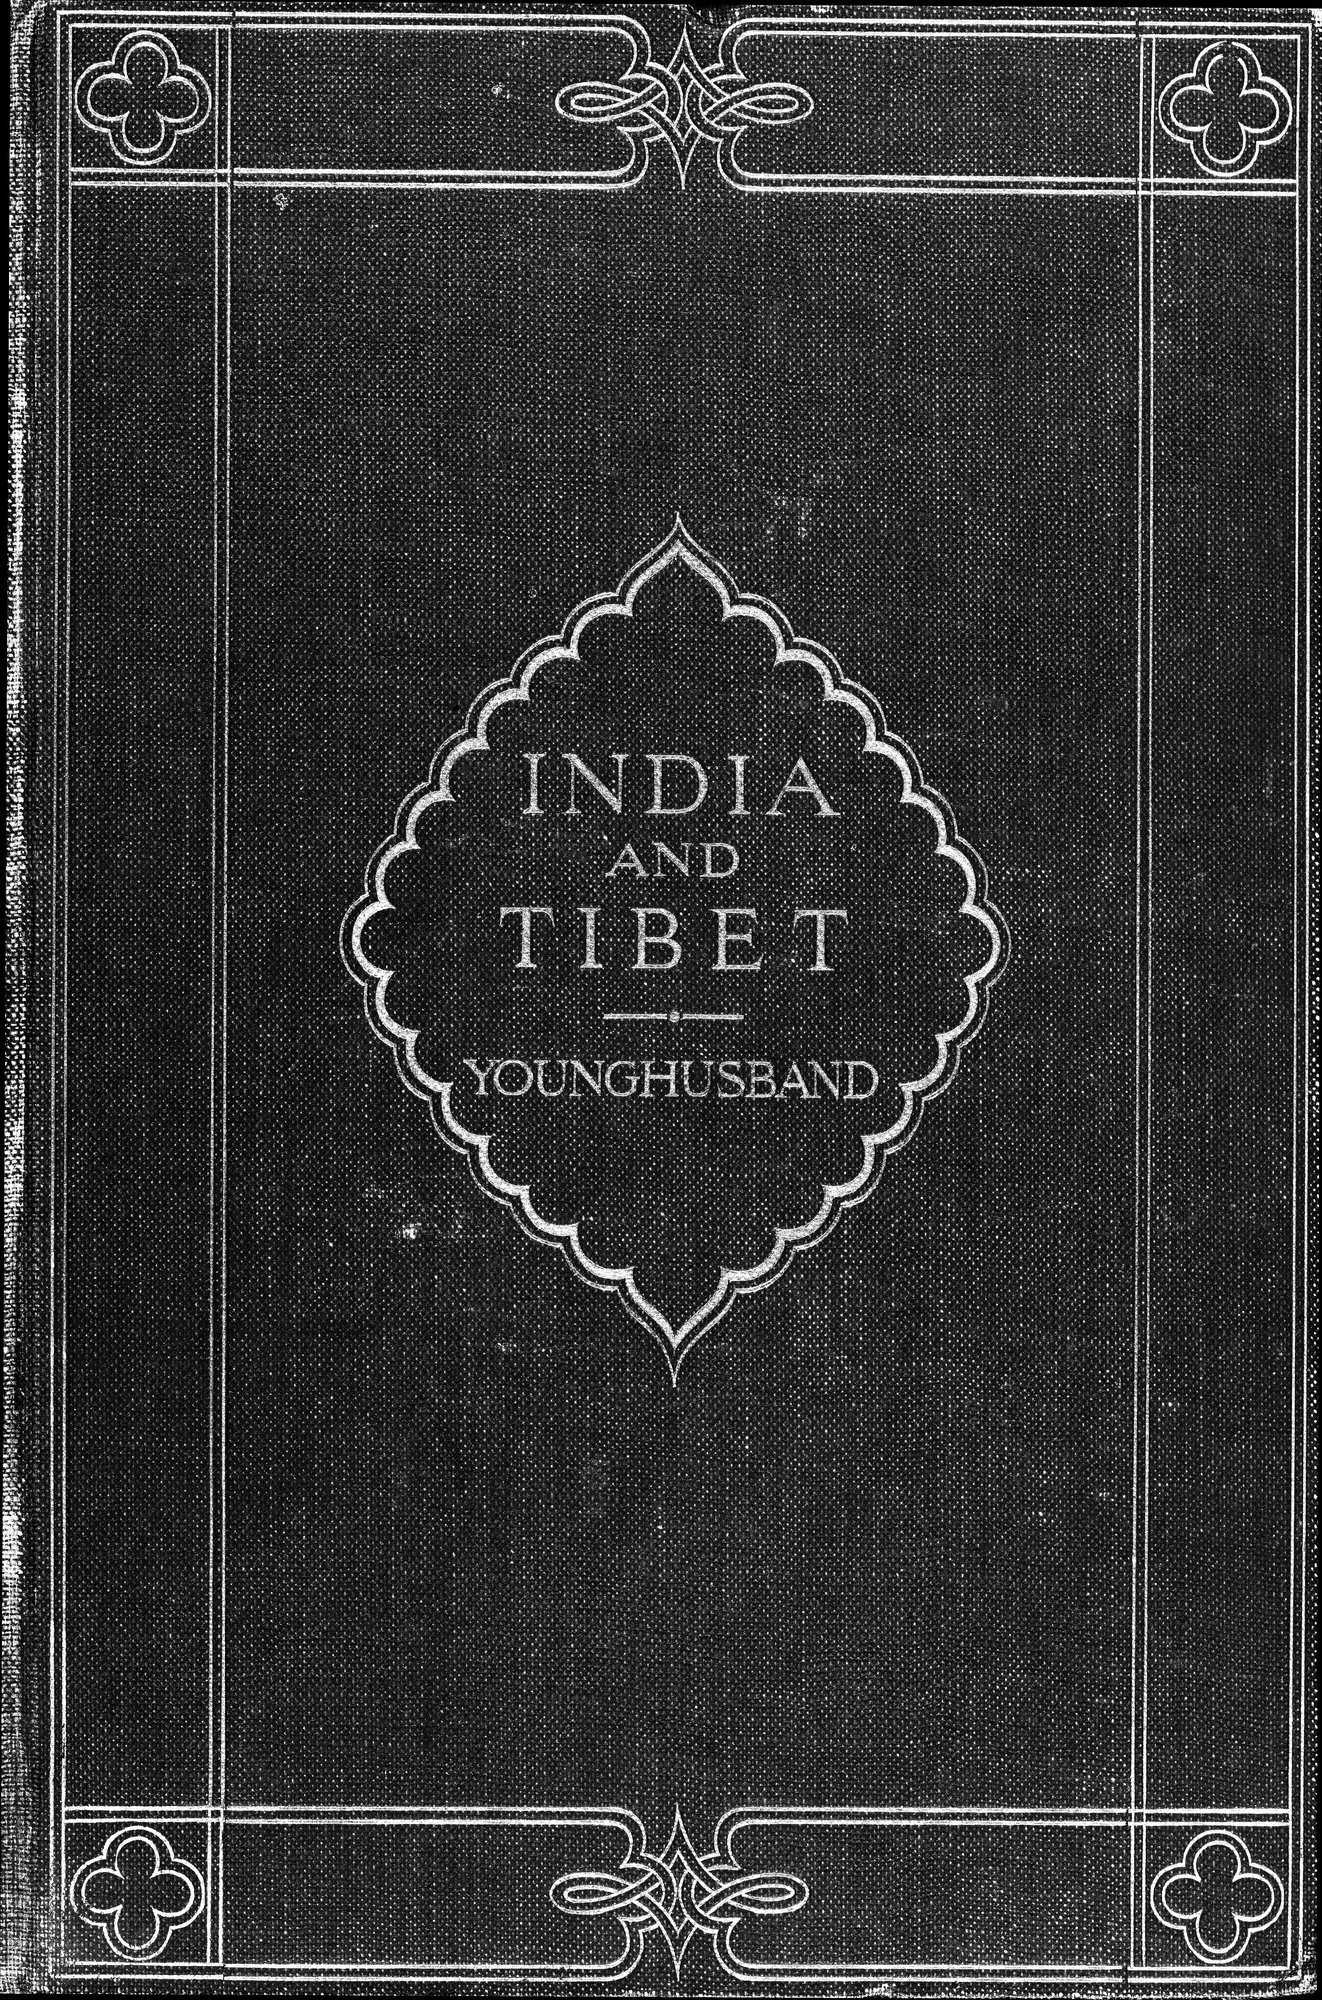 India and Tibet : vol.1 / Page 1 (Grayscale High Resolution Image)